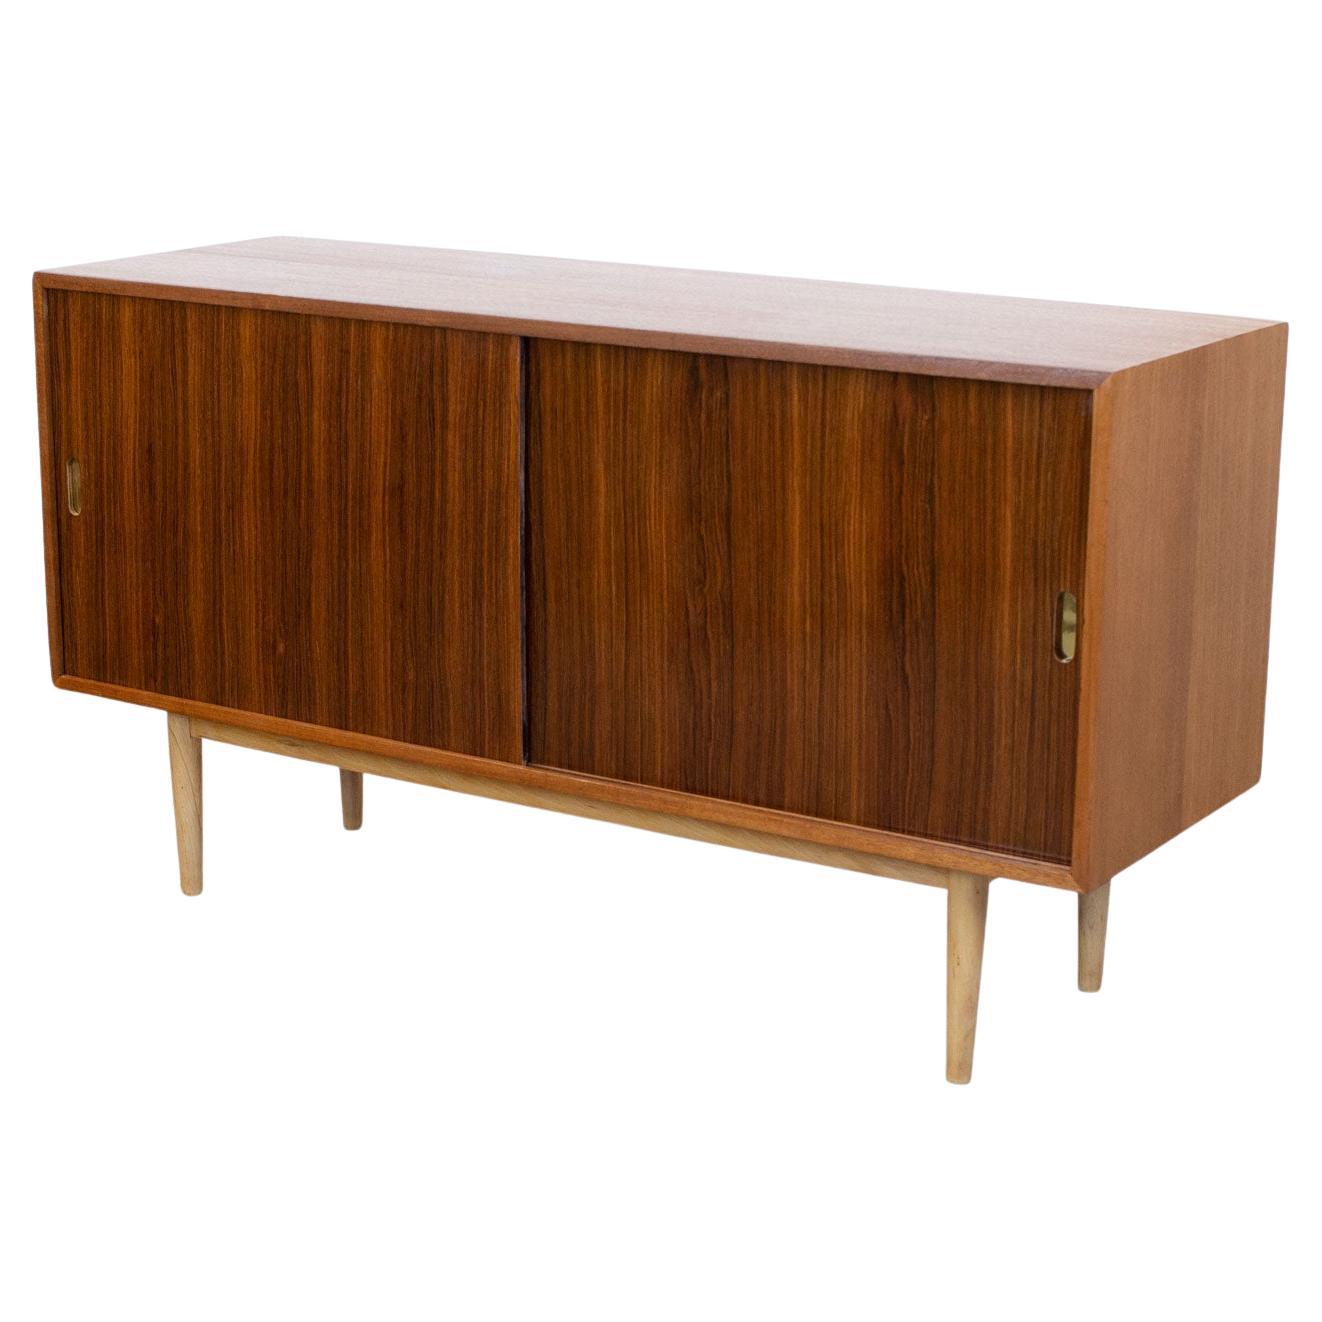 Interplan Unit 'K' Rosewood Sideboard by Robin Day for Hille, 1950s